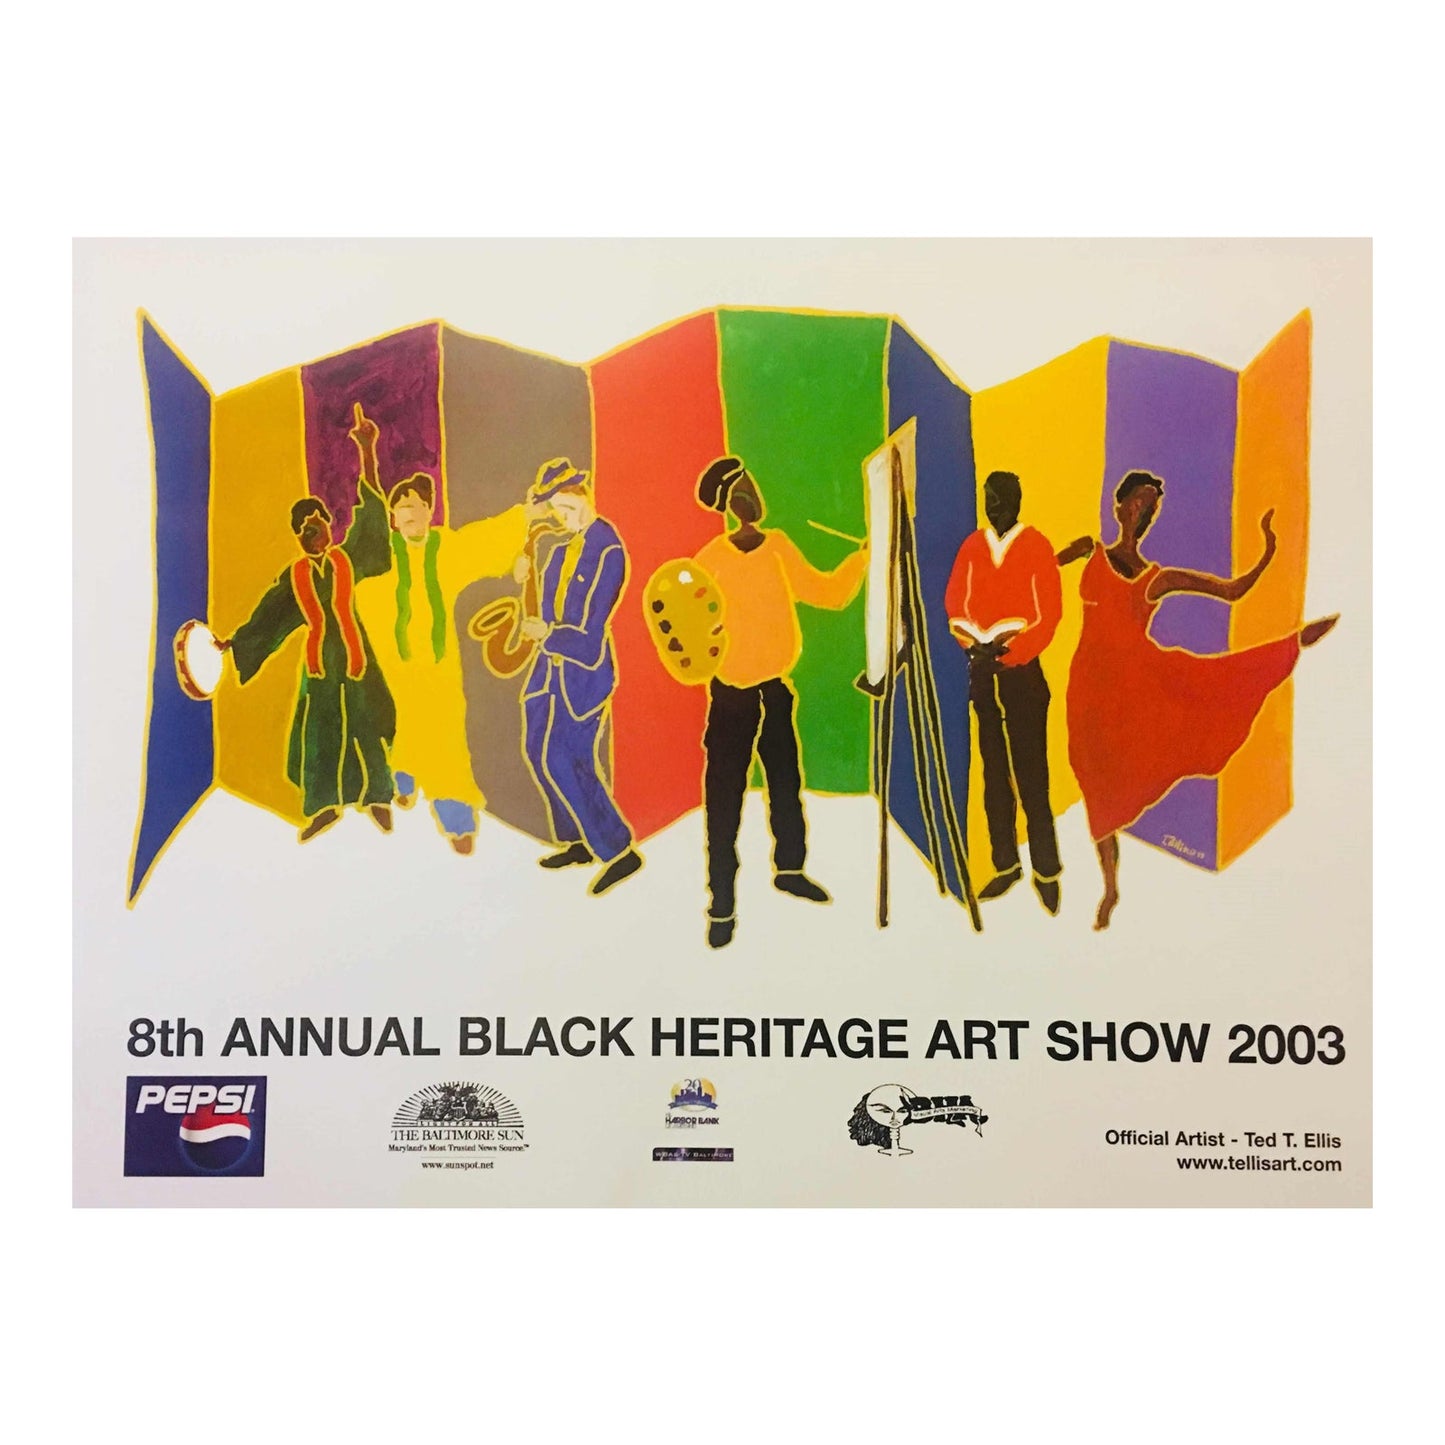 Ted T. Ellis 2003 Black Heritage Art Show 8th Annual Poster Print